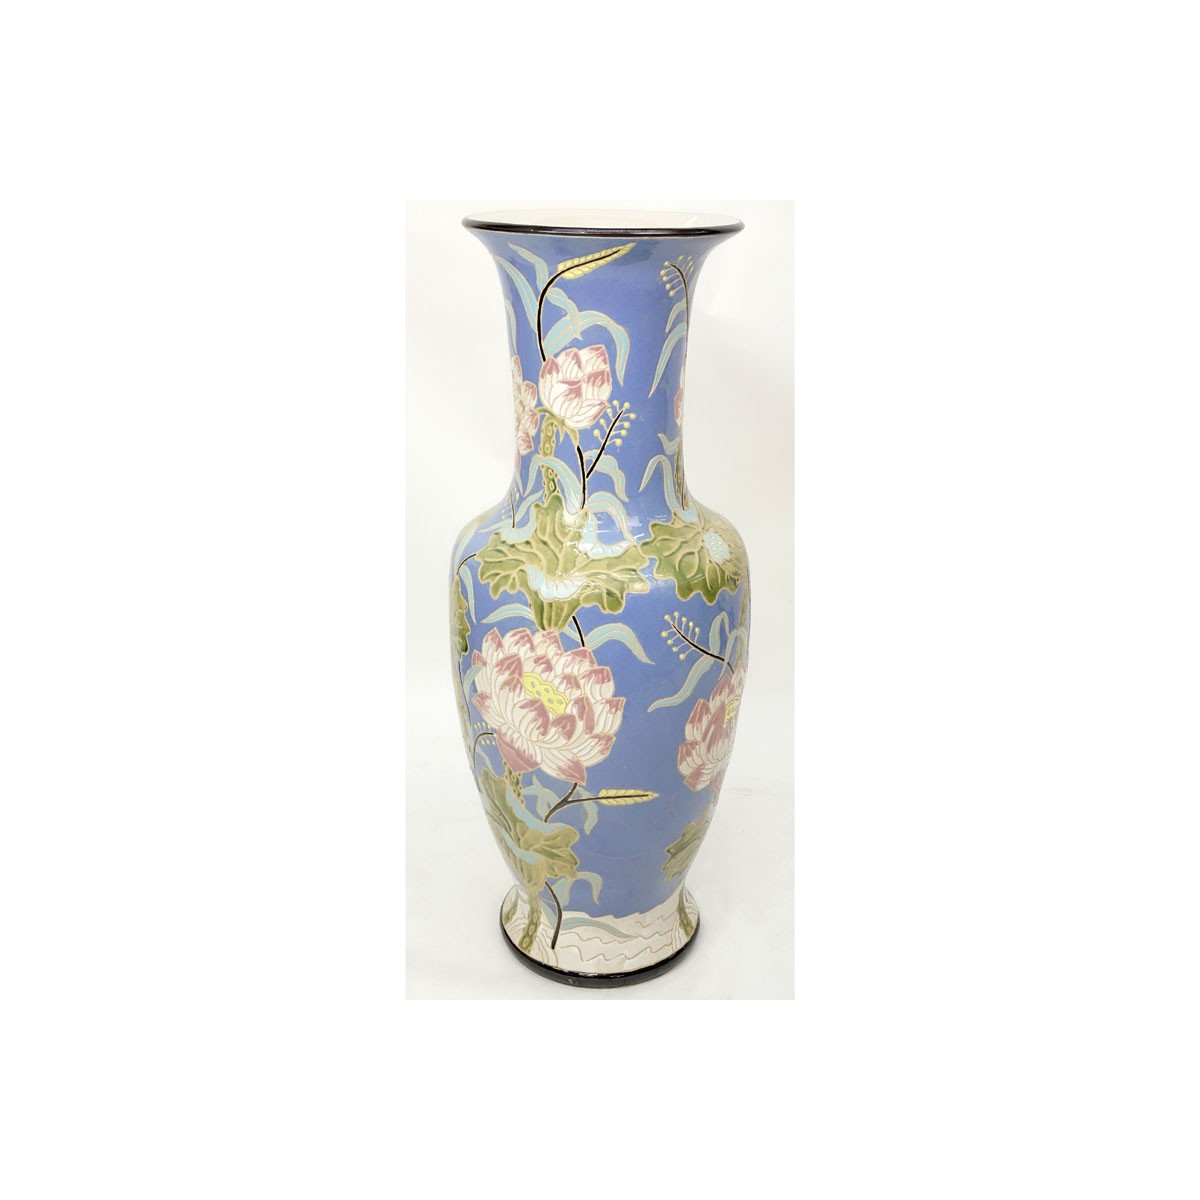 Monumental Majolica Pottery Vase. Features Asian inspired lotus flower motif on blue ground. Unsign